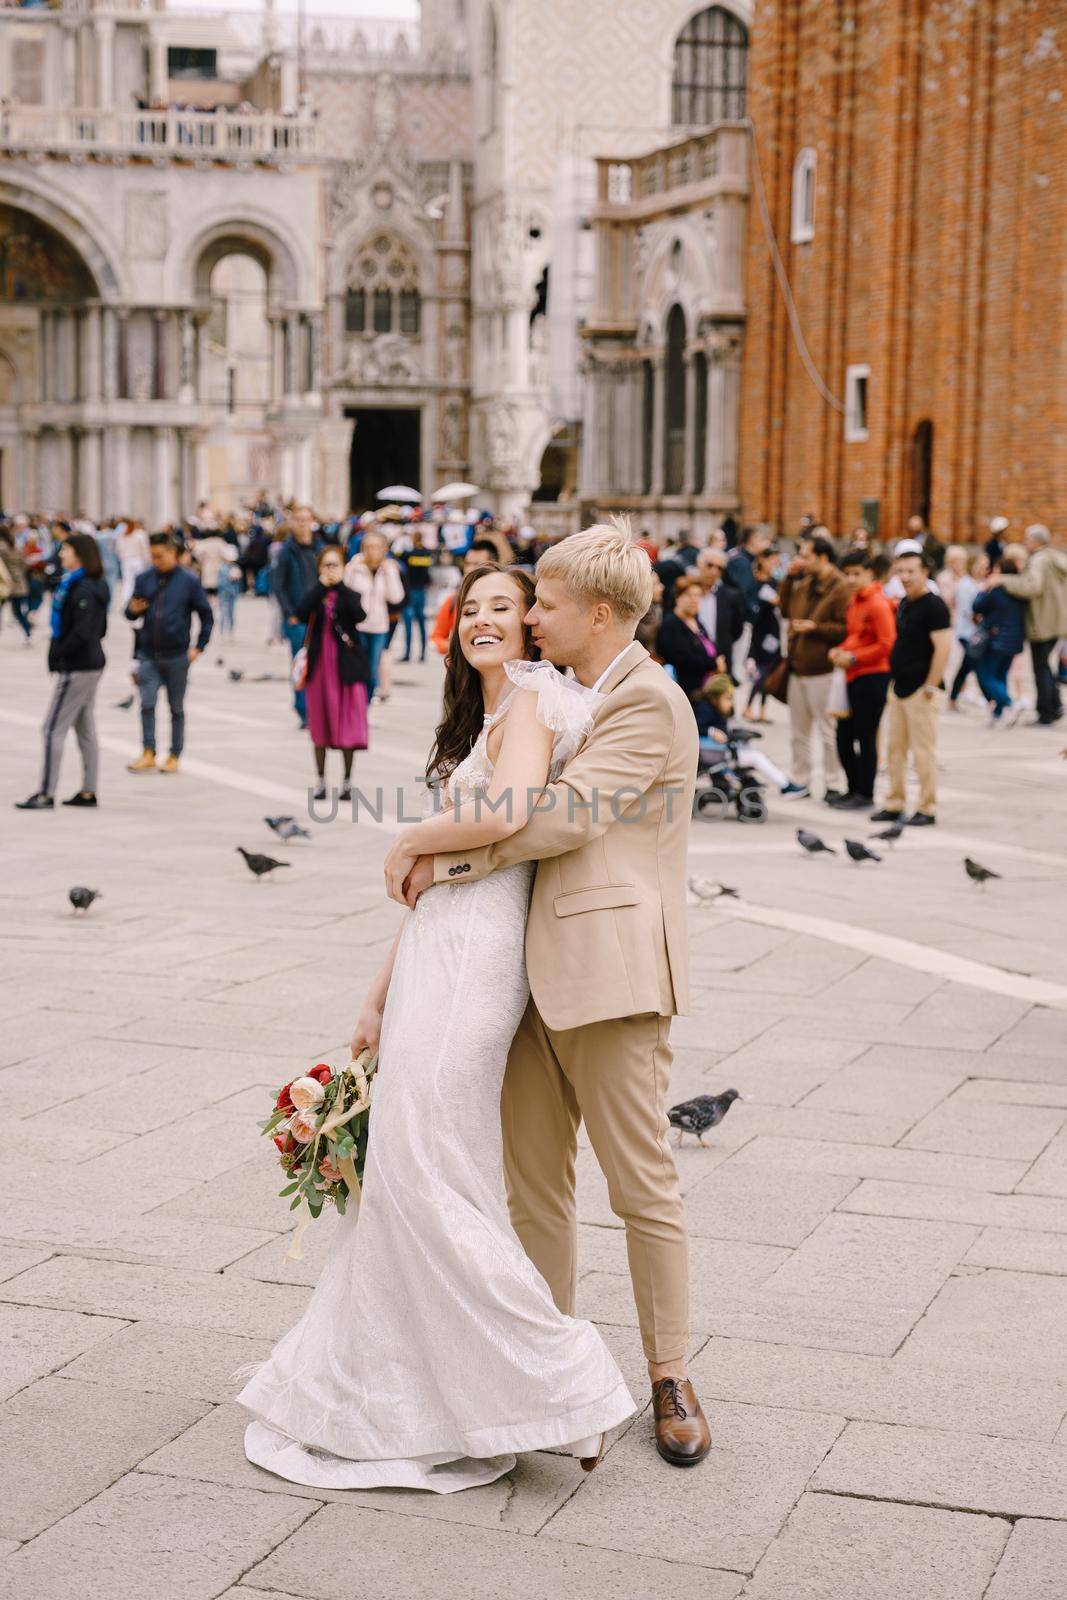 Wedding in Venice, Italy. The bride and groom cuddle in Piazza San Marco, overlooking Campanoil and St. Mark Cathedral, among the crowds of tourists.